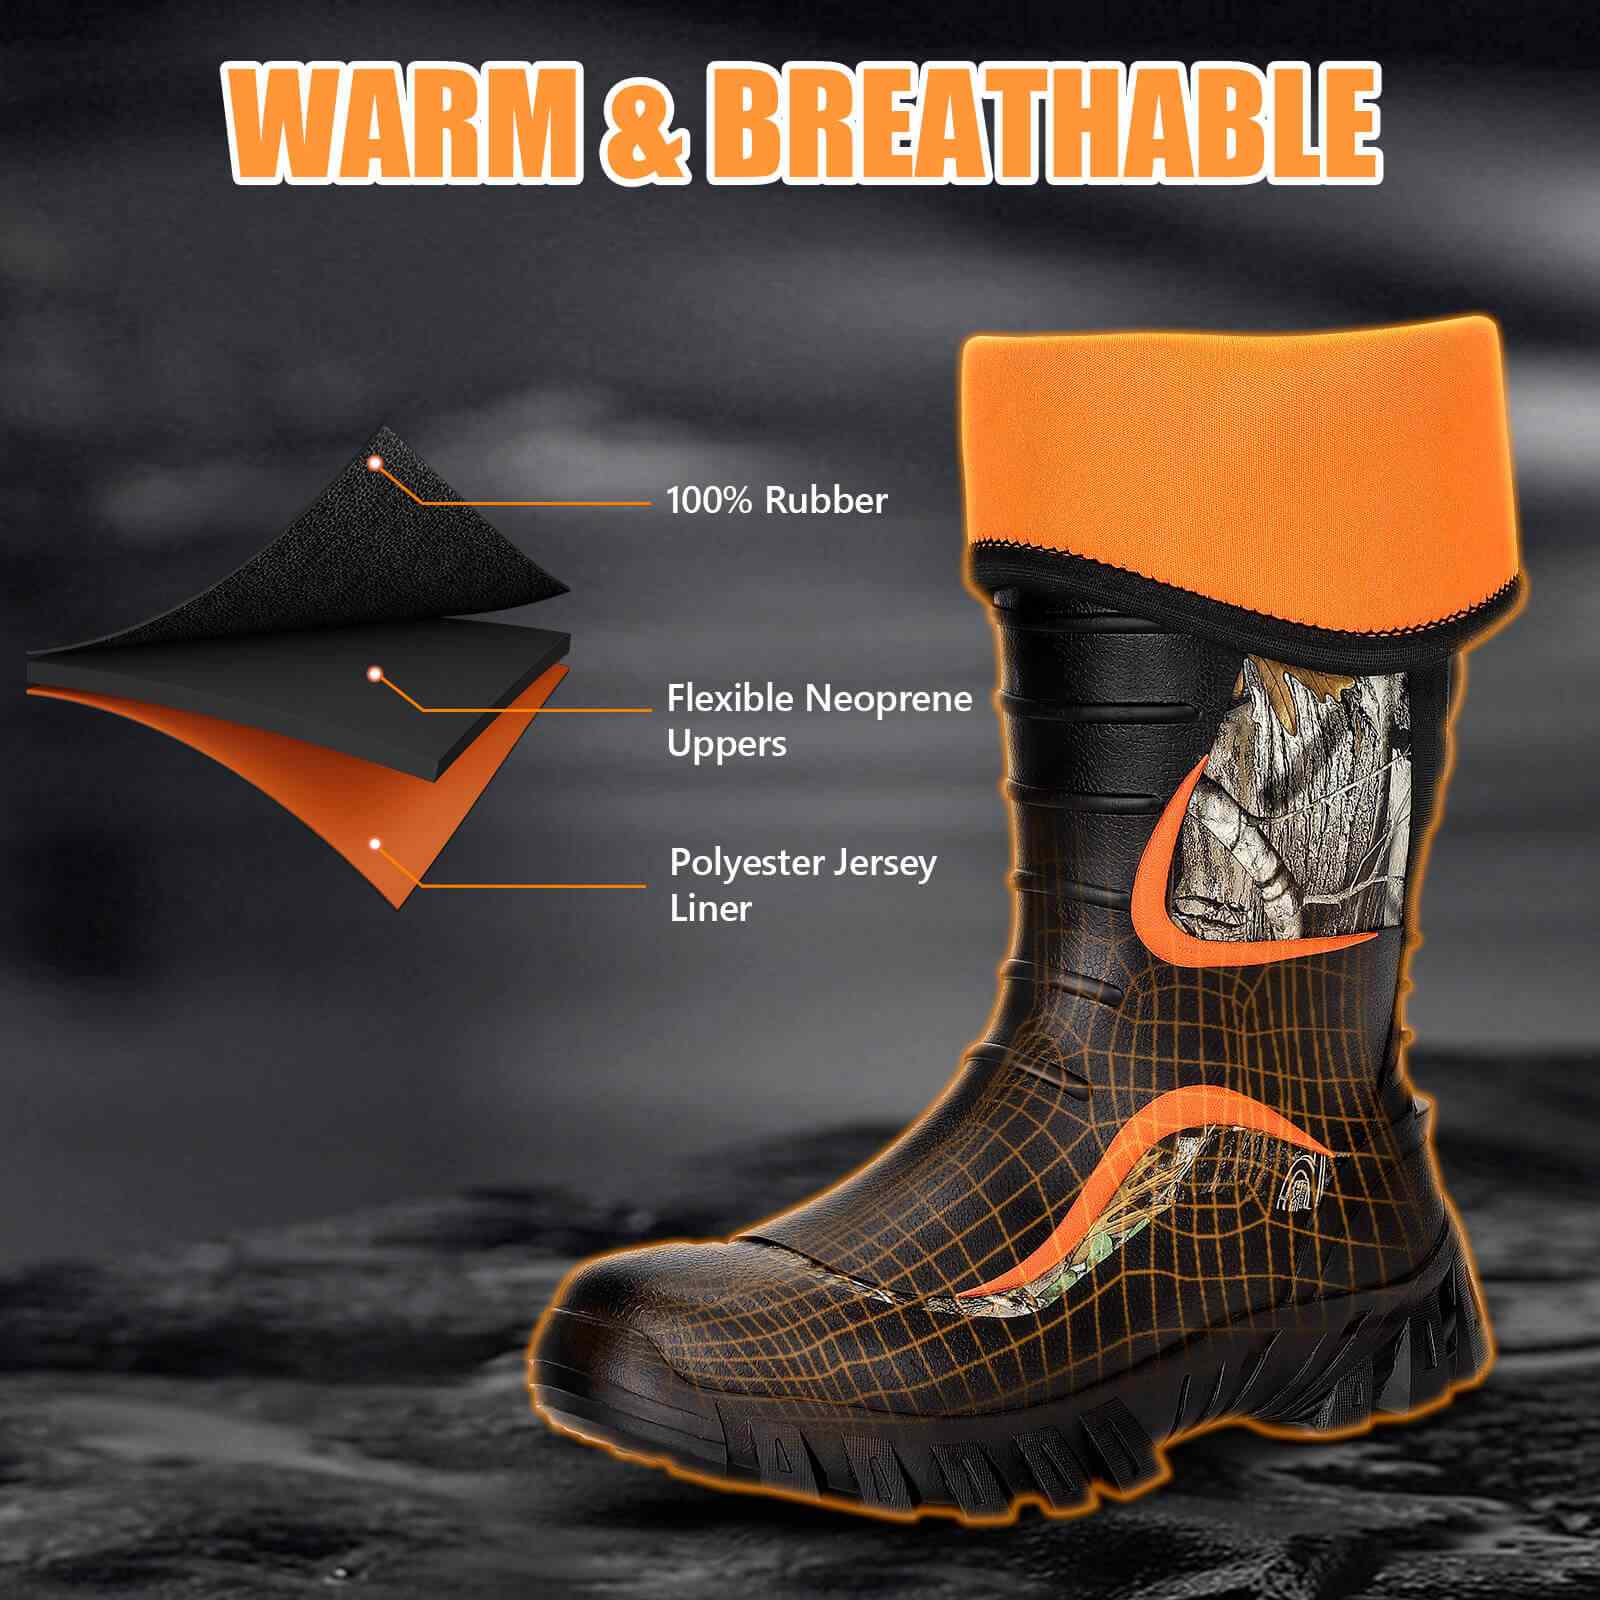 Kalkal Insulated Warmest Rubber Hunting Boots, Camouflage Boots